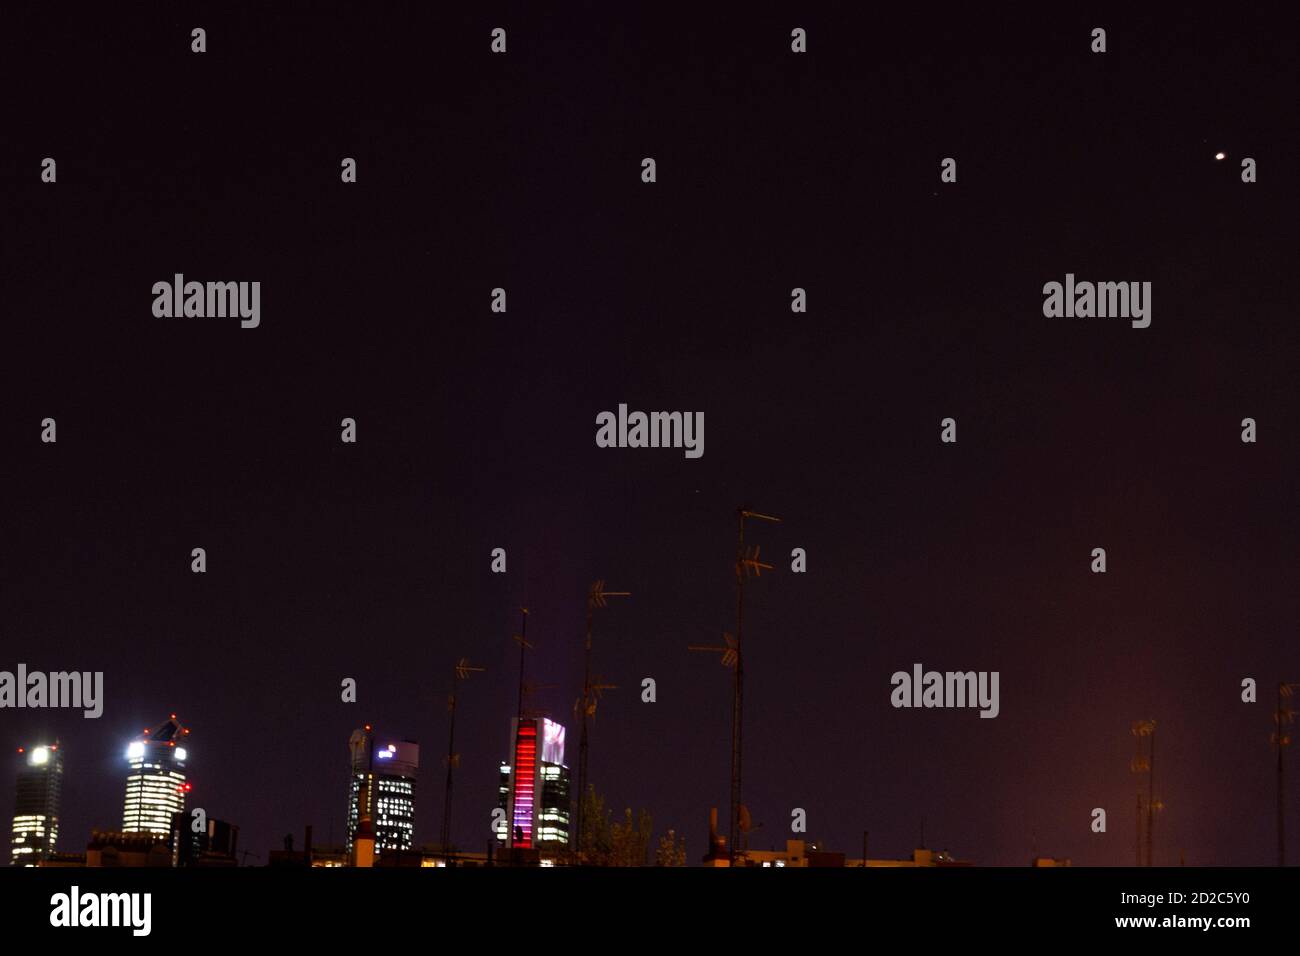 The planet Mars seen from the Community of Madrid and the skyscrapers of Madrid with the 4 towers, in Spain. Stock Photo